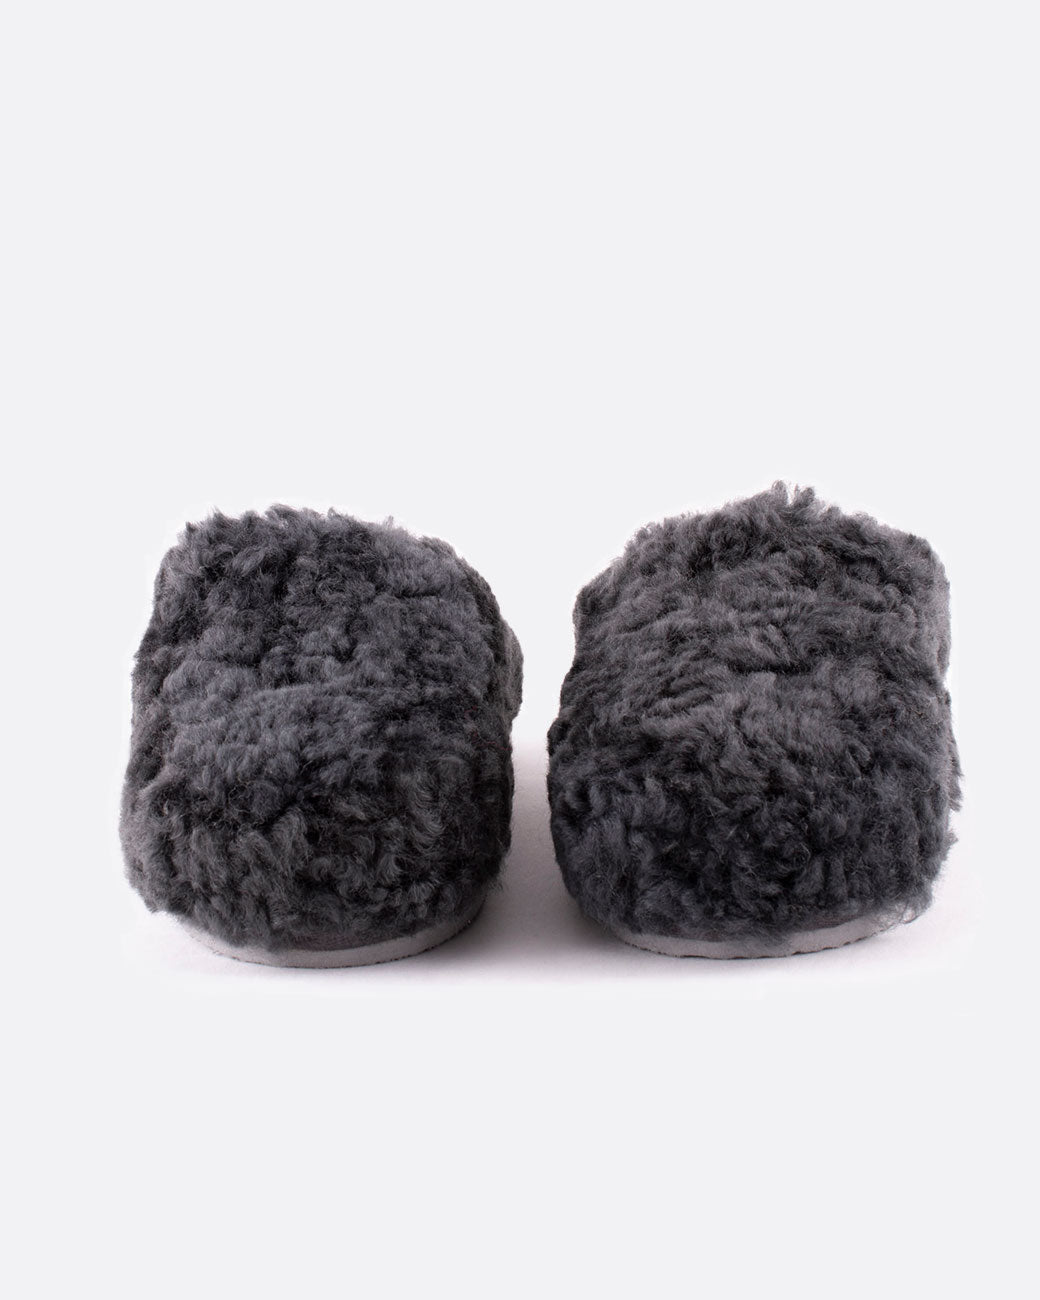 Jenny sheepskin slippers in charcoal gray, shown from the front